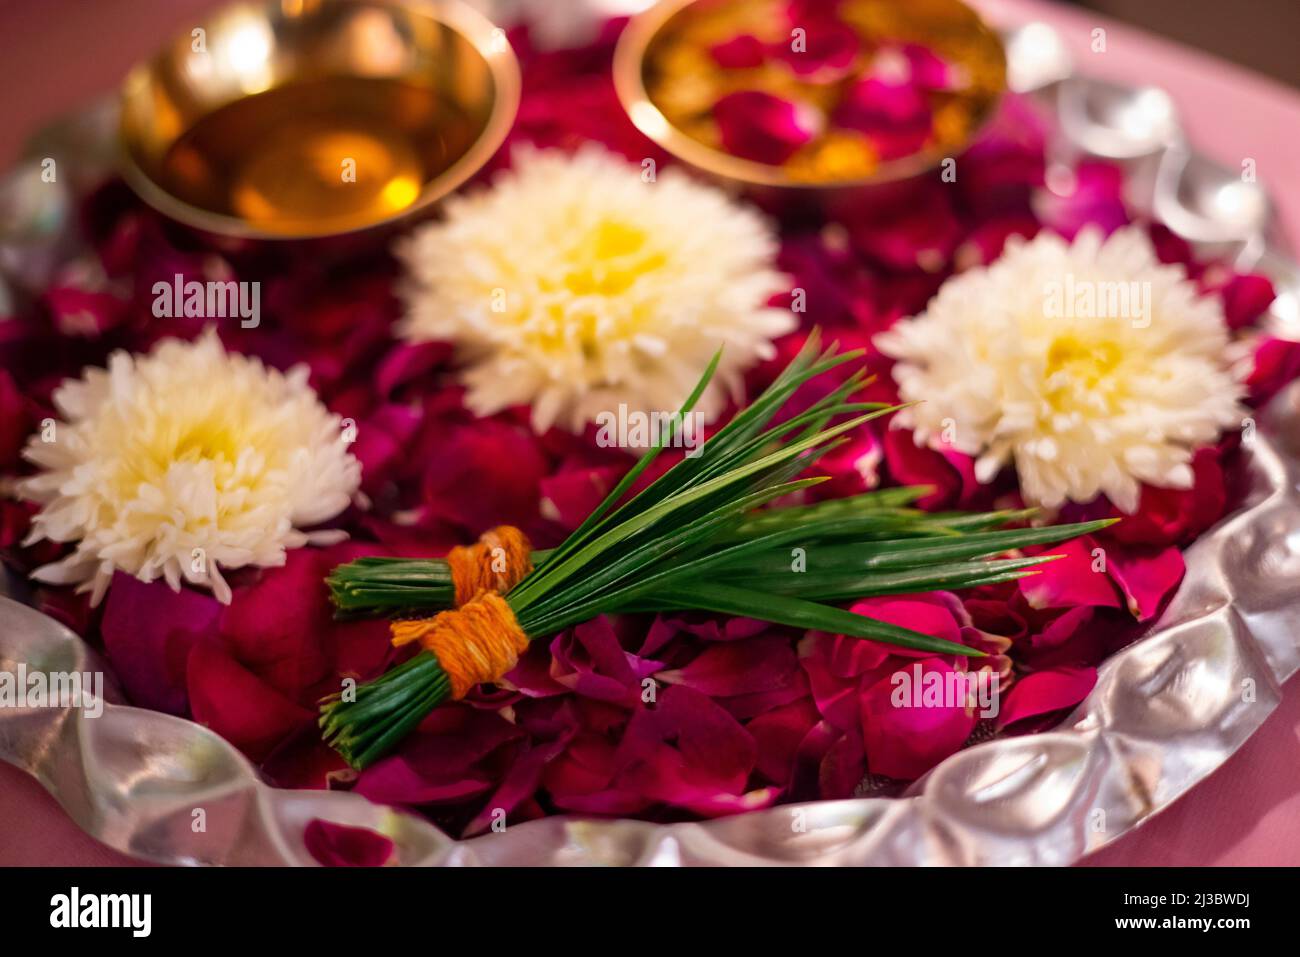 Hindu Marriage Ceremony High Resolution Stock Photography and Images - Alamy